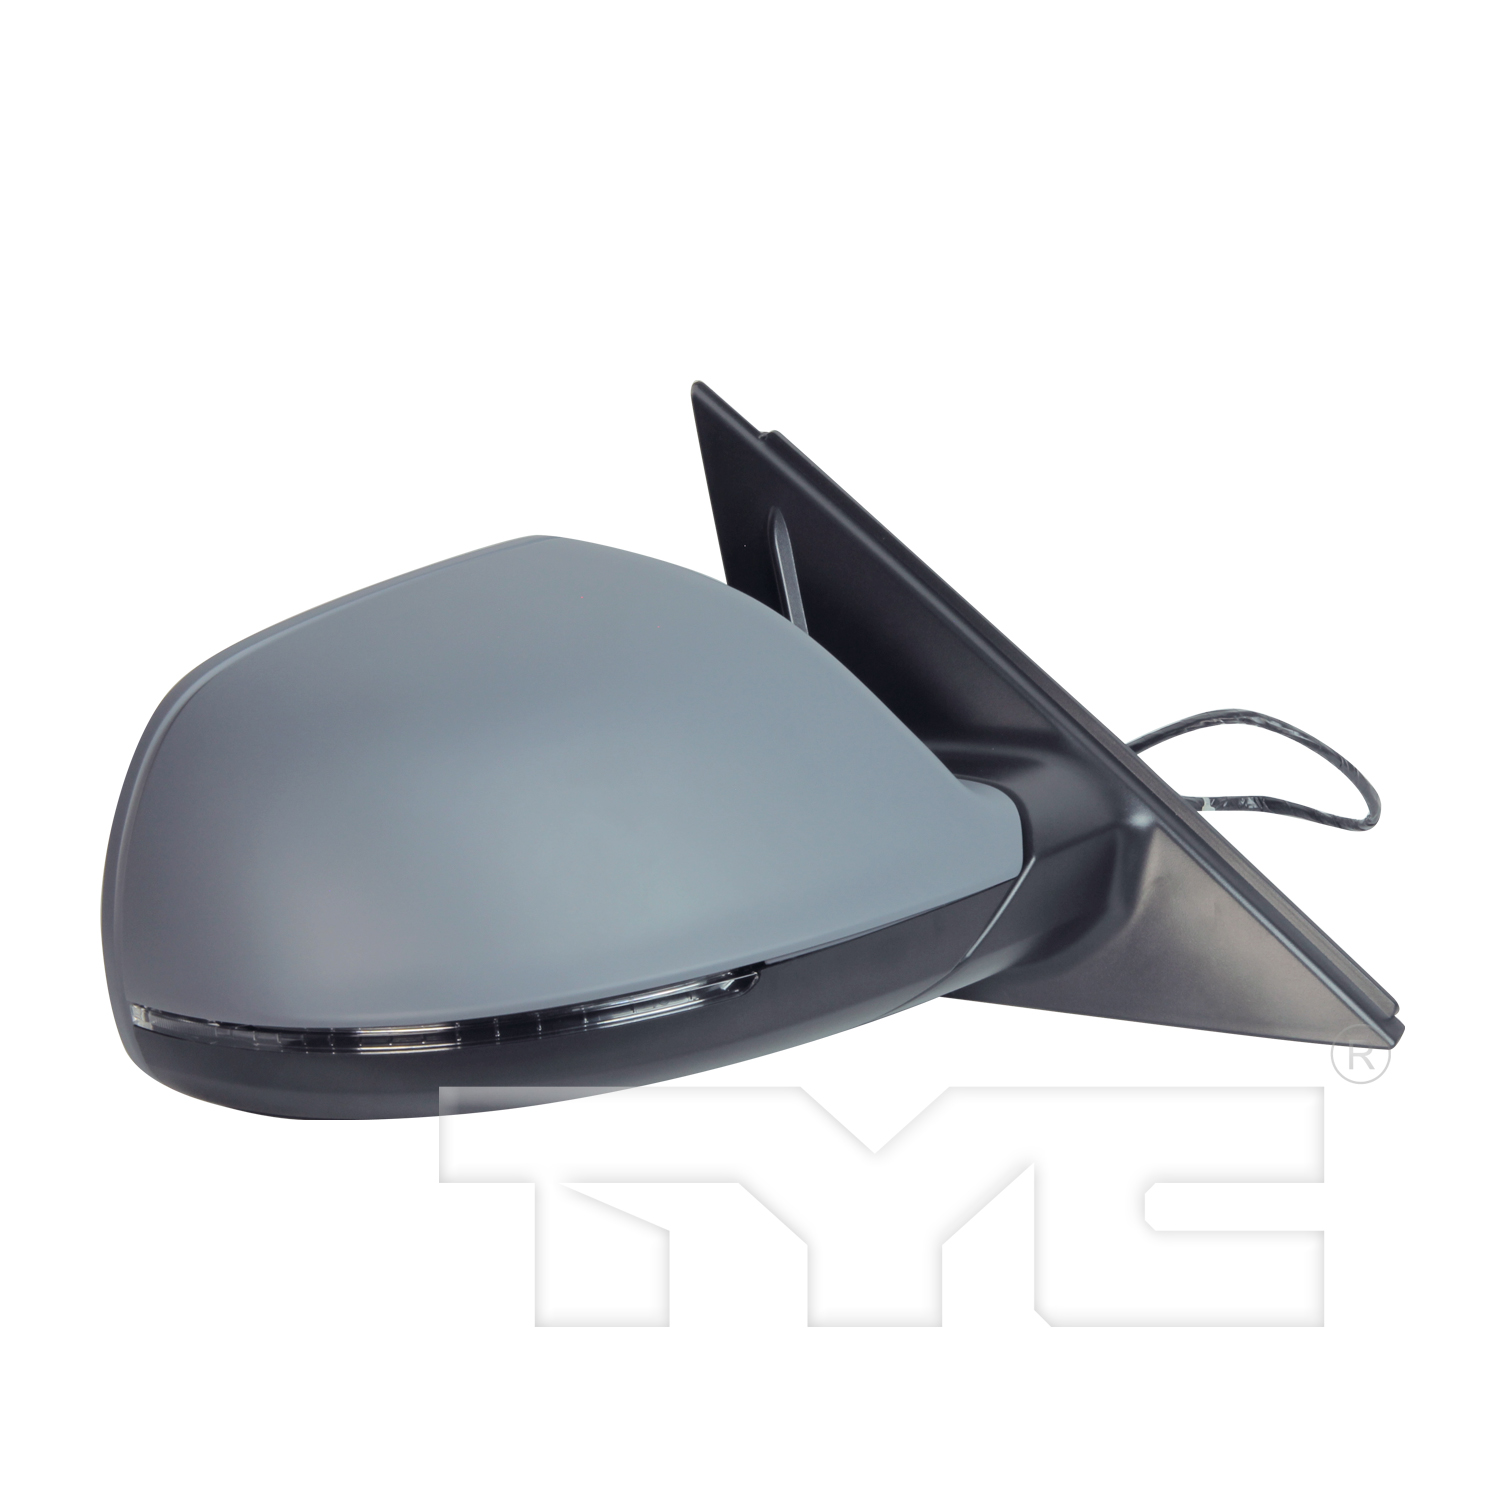 Aftermarket MIRRORS for AUDI - Q5, Q5,09-13,RT Mirror outside rear view